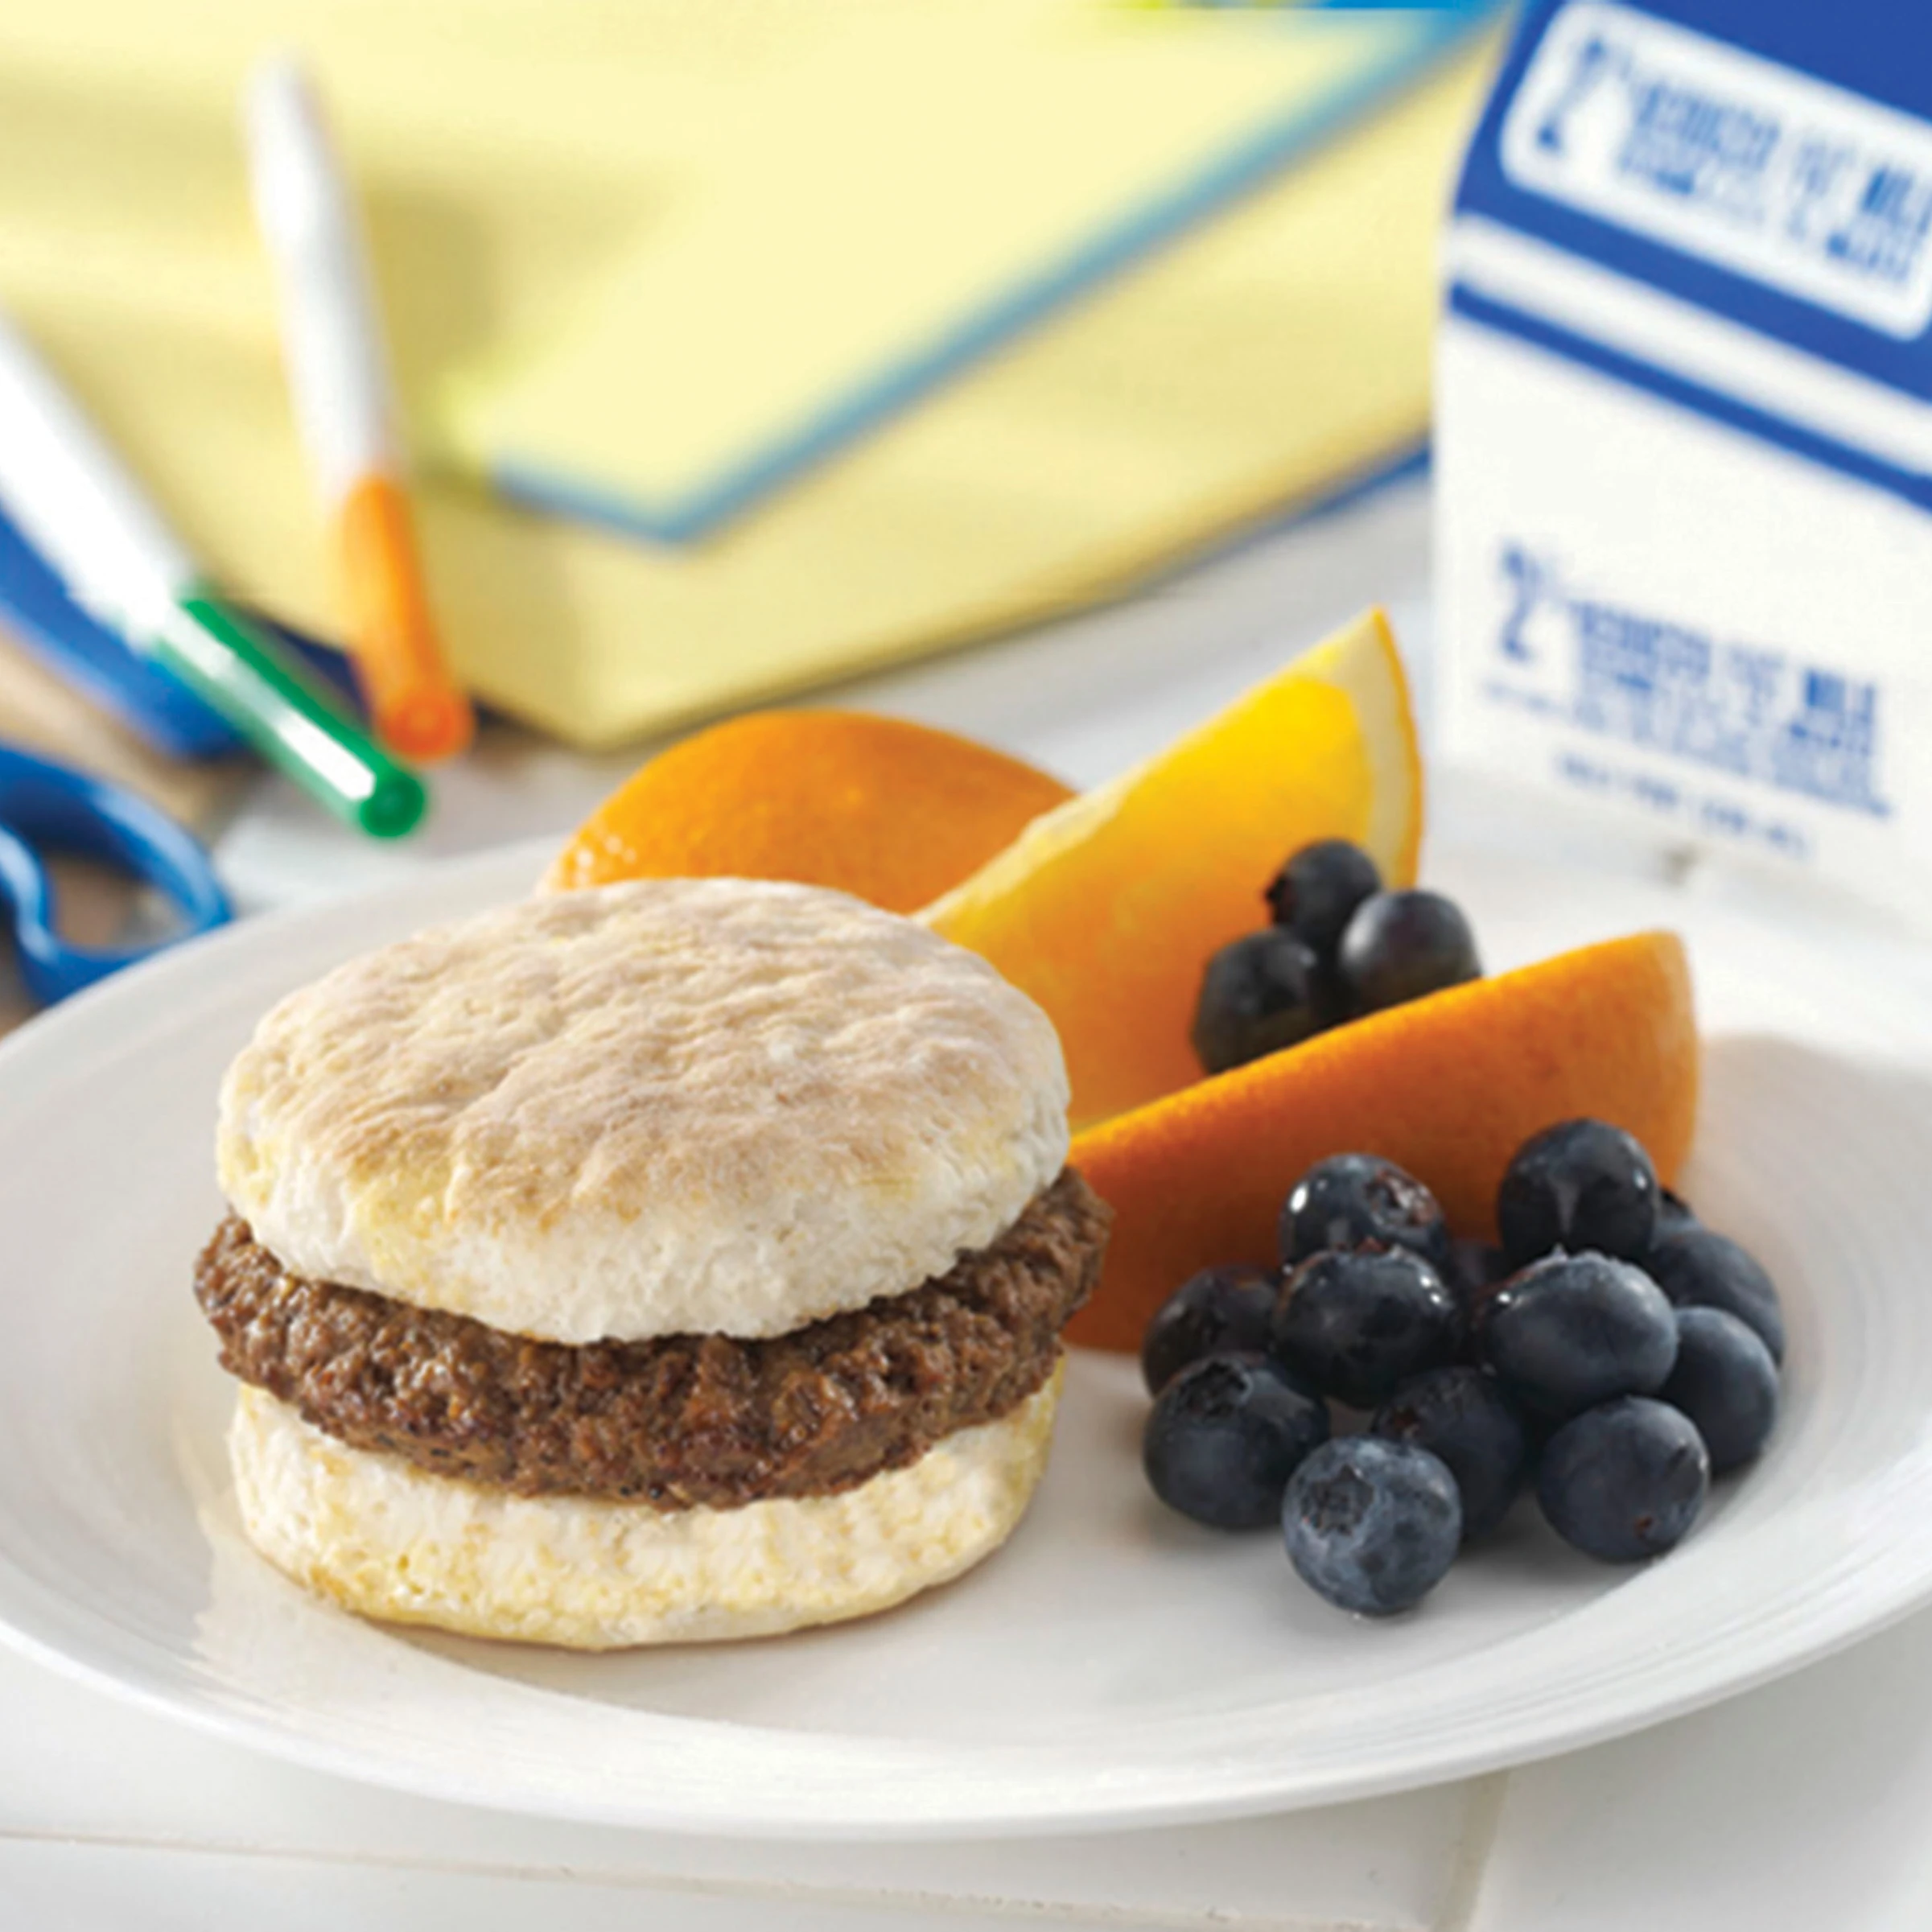 AdvancePierre™ Fully Cooked Beef Pattie with Sausage Seasoning on a Whole Grain Biscuit, 3.14ozhttp://images.salsify.com/image/upload/s--Y-J7IxJ7--/bw6r1zbjv3oun7gf3rqd.webp